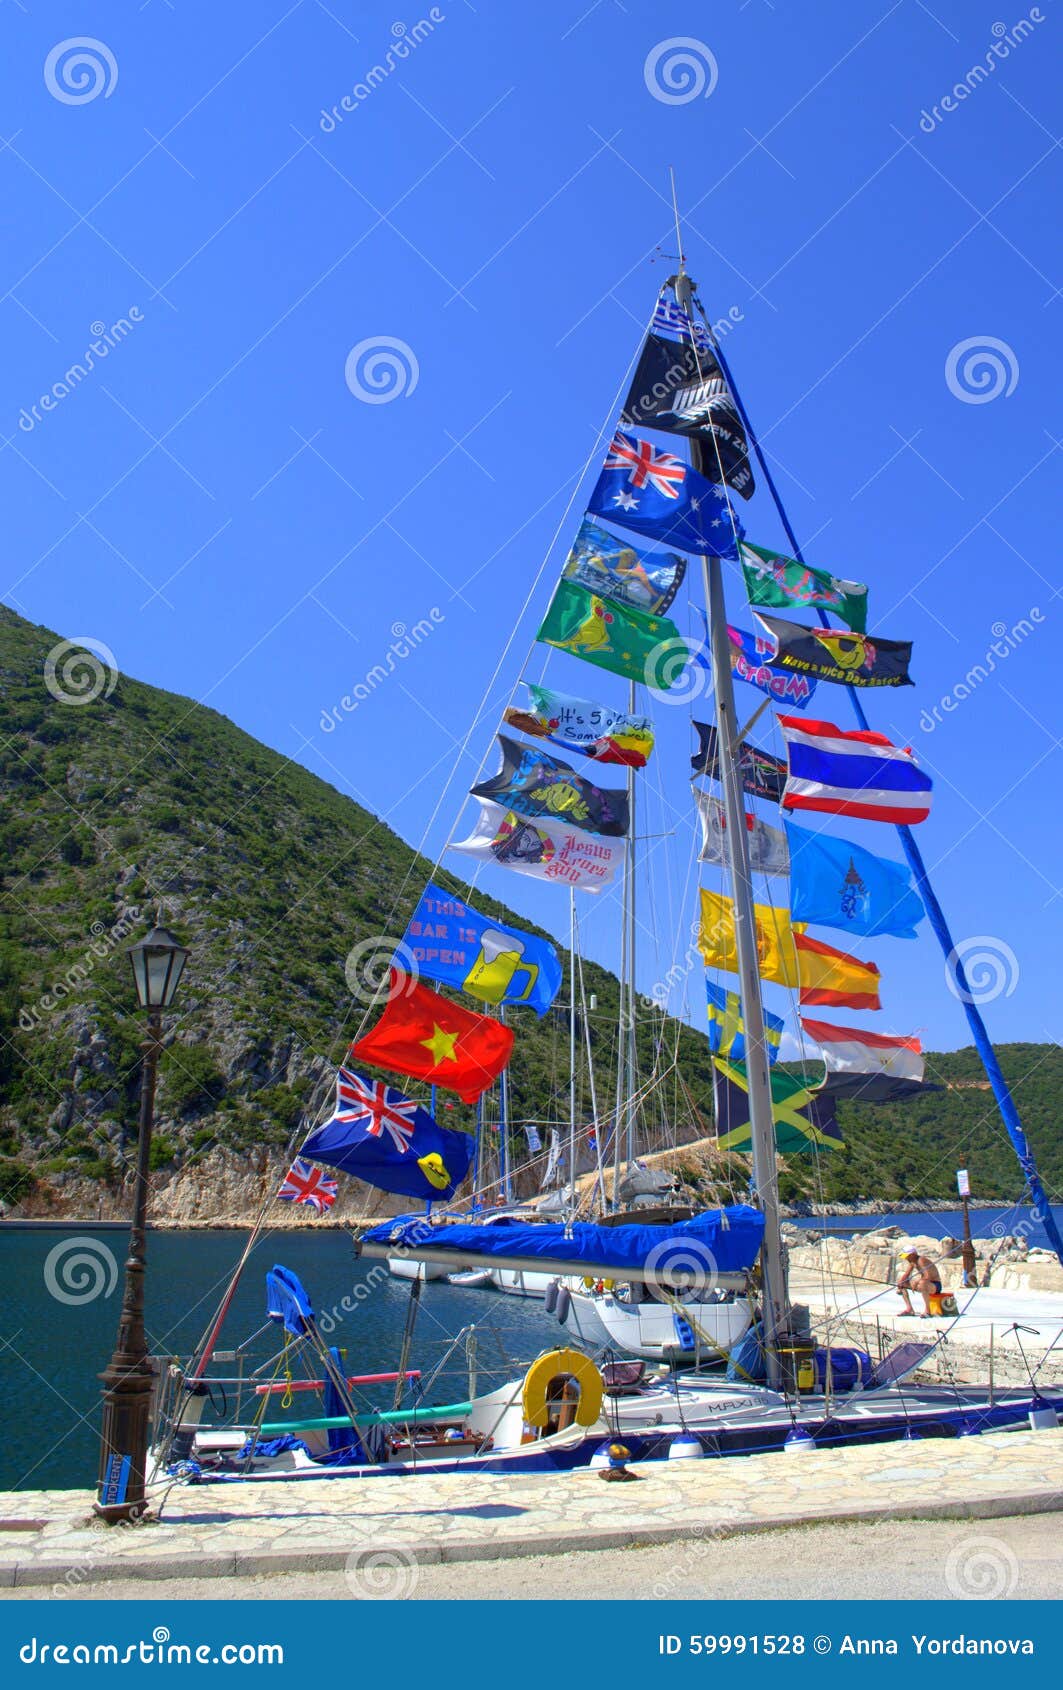 sailboat with flags